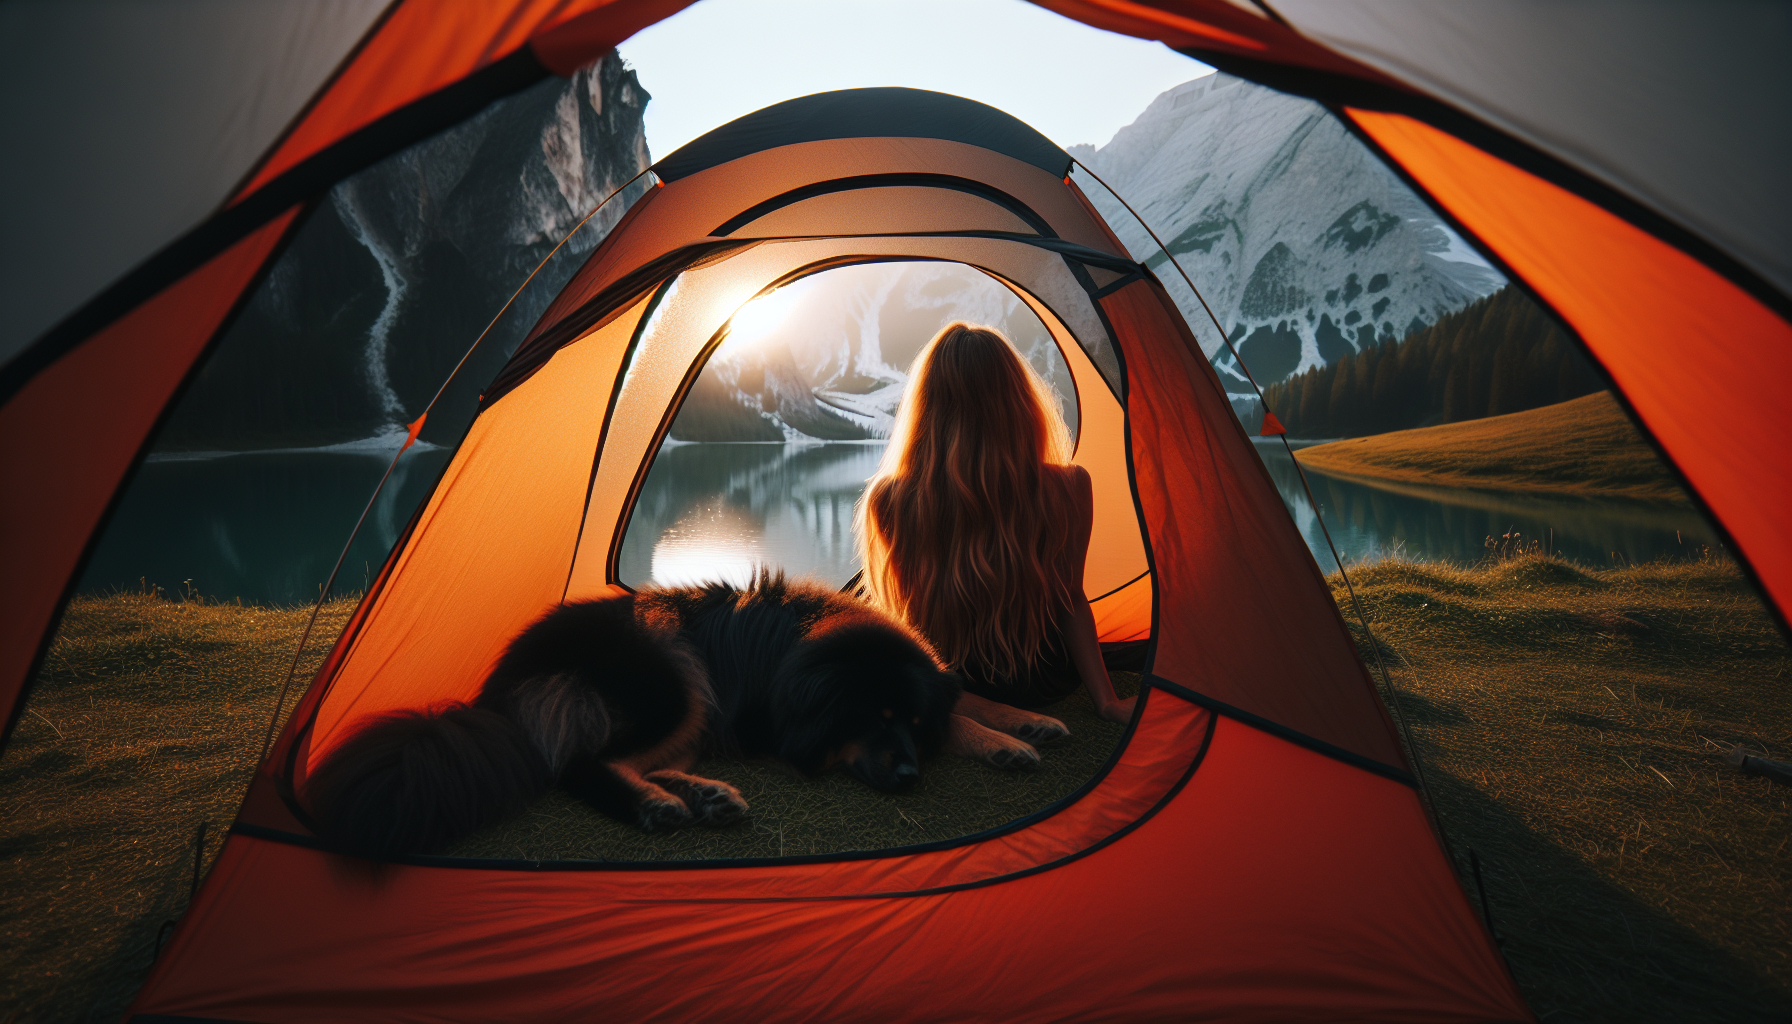 Solo tent with a dog sleeping inside